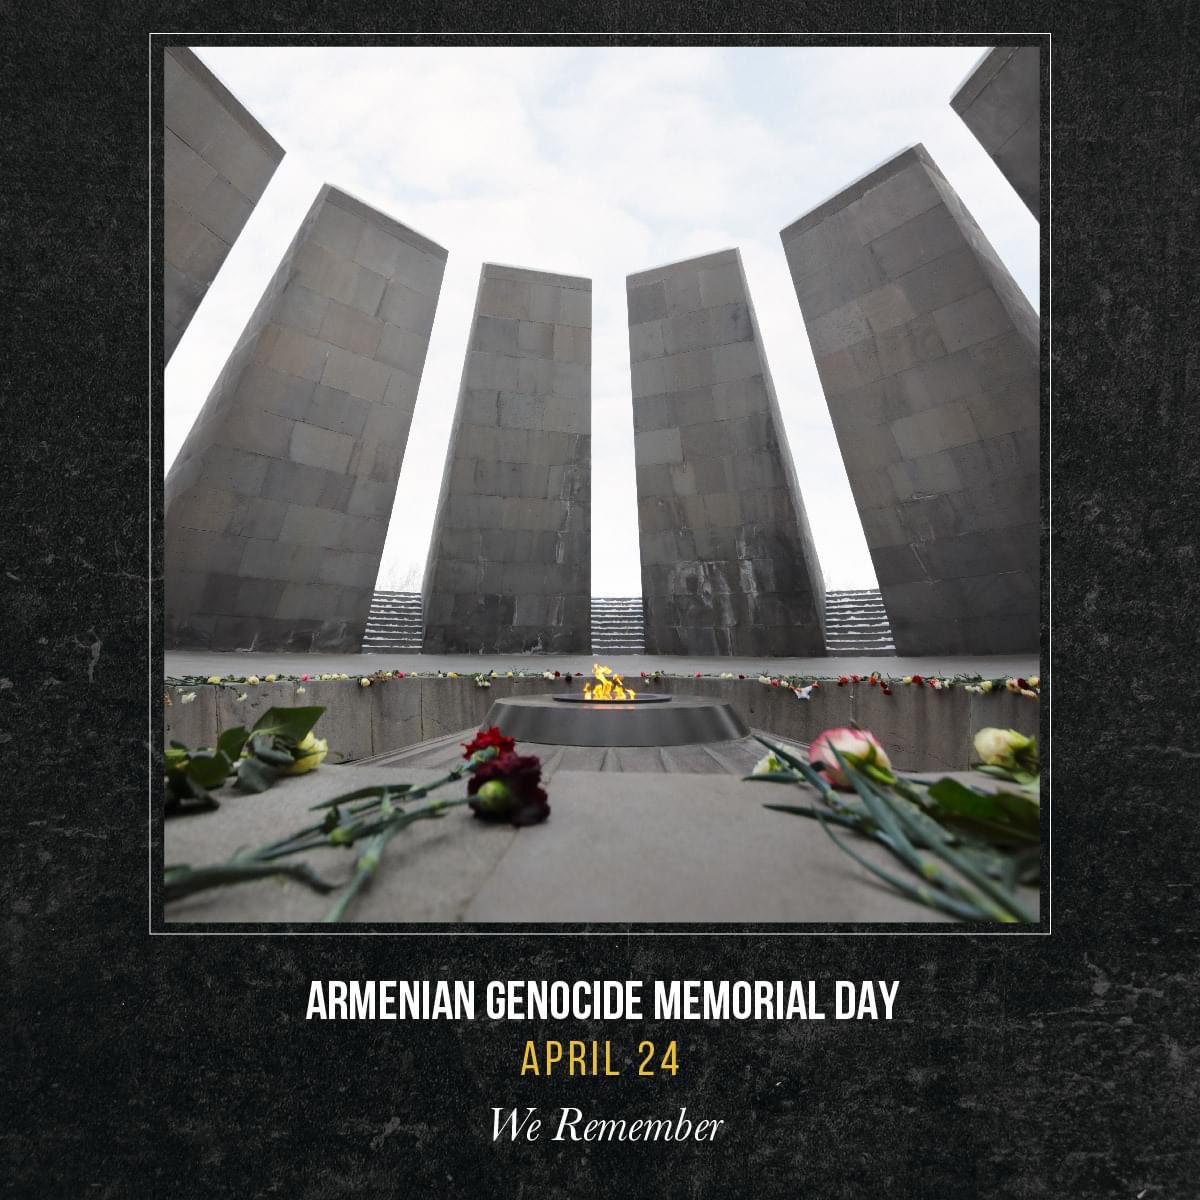 On this Armenian Genocide Memorial Day, we pay tribute to the 1.5 million who unjustly suffered and lost their lives. Let us honour the memory of victims, survivors and their descendants by promoting peace and justice — ensuring that such atrocities never happen again.